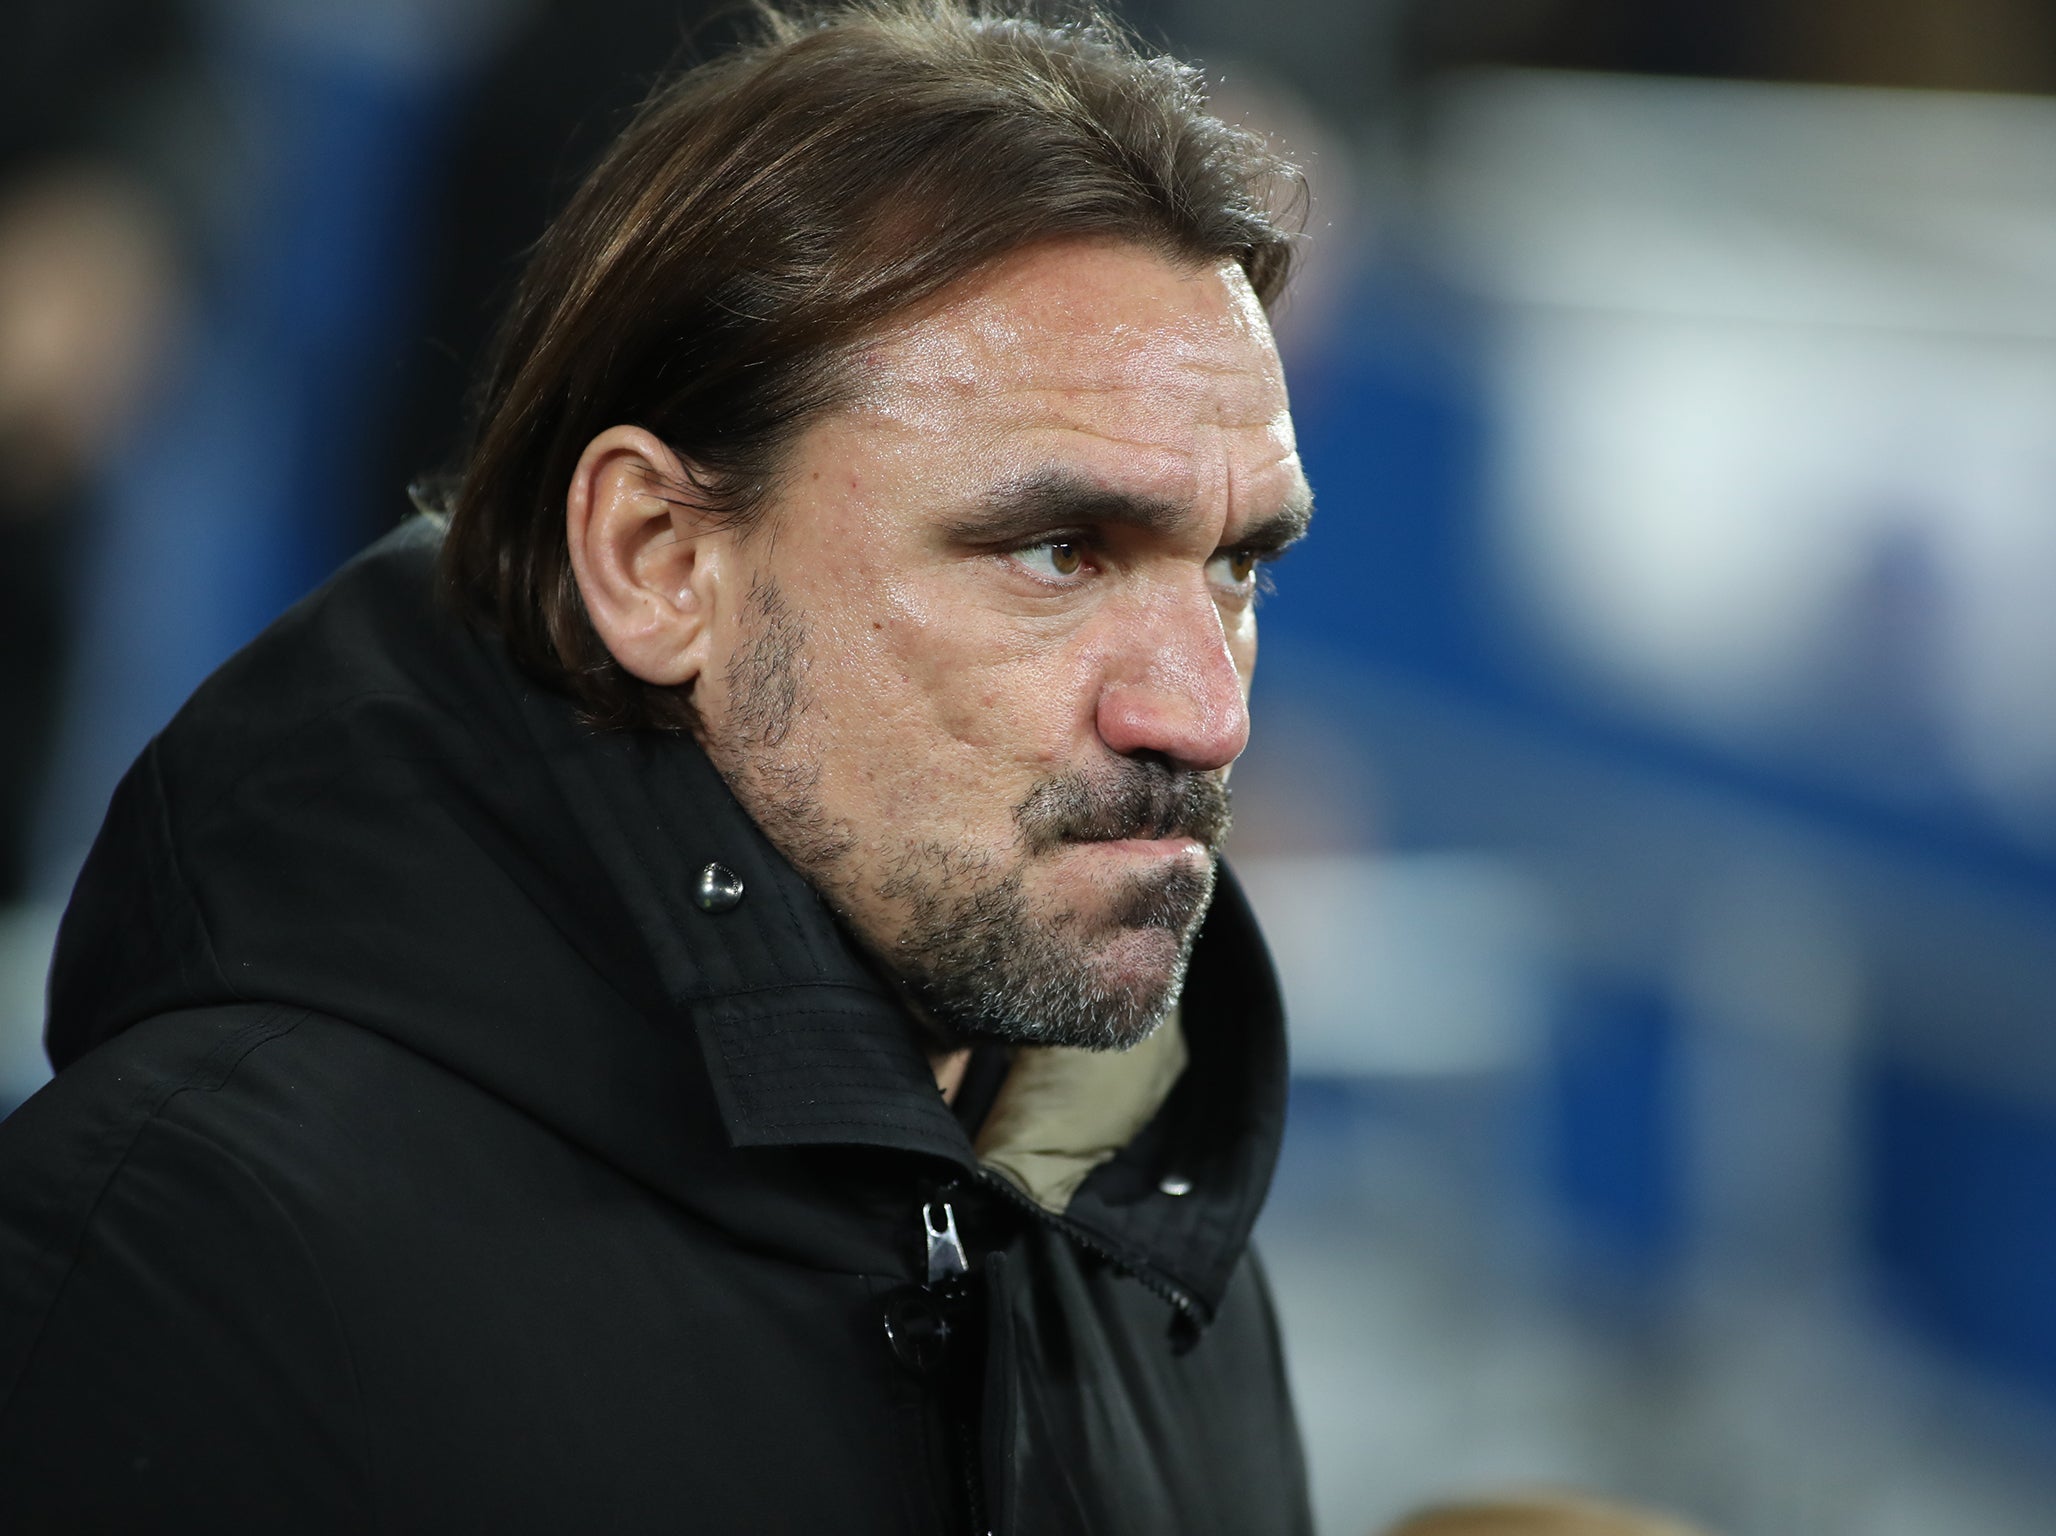 Daniel Farke's side came close to knocking out the Premier League champions